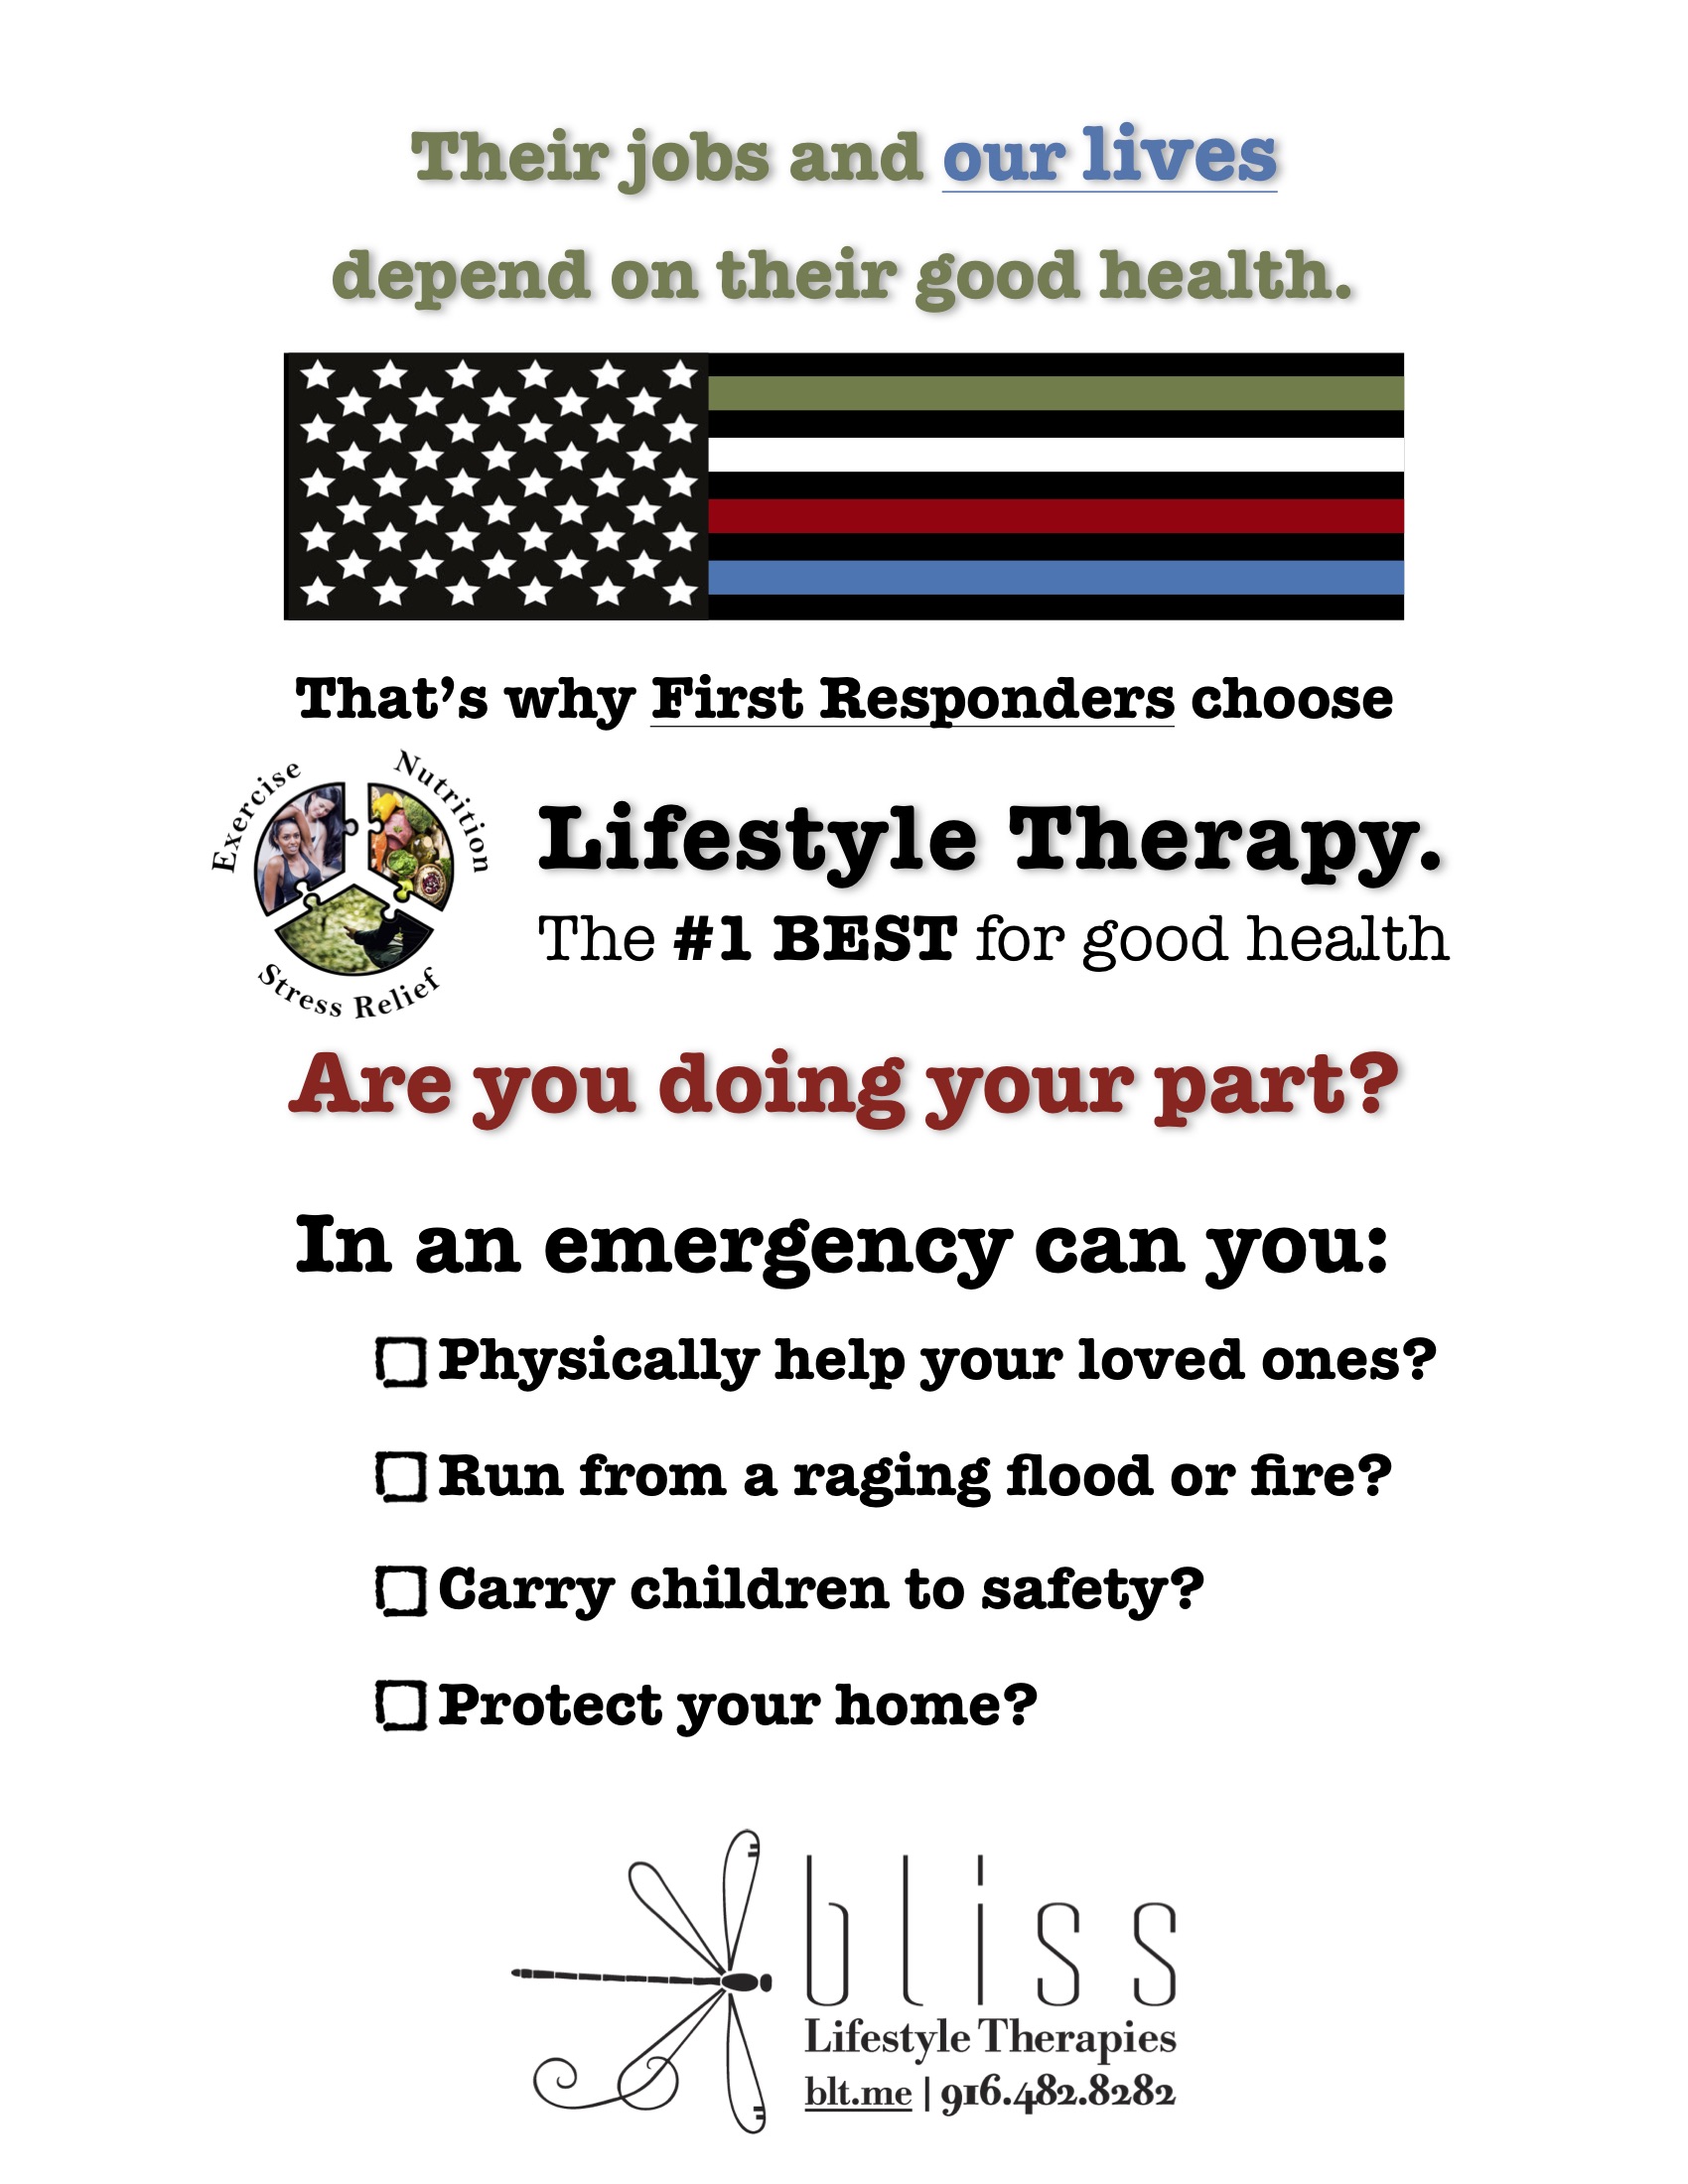 First Responders choose Lifestyle Therapy, shouldn't you?